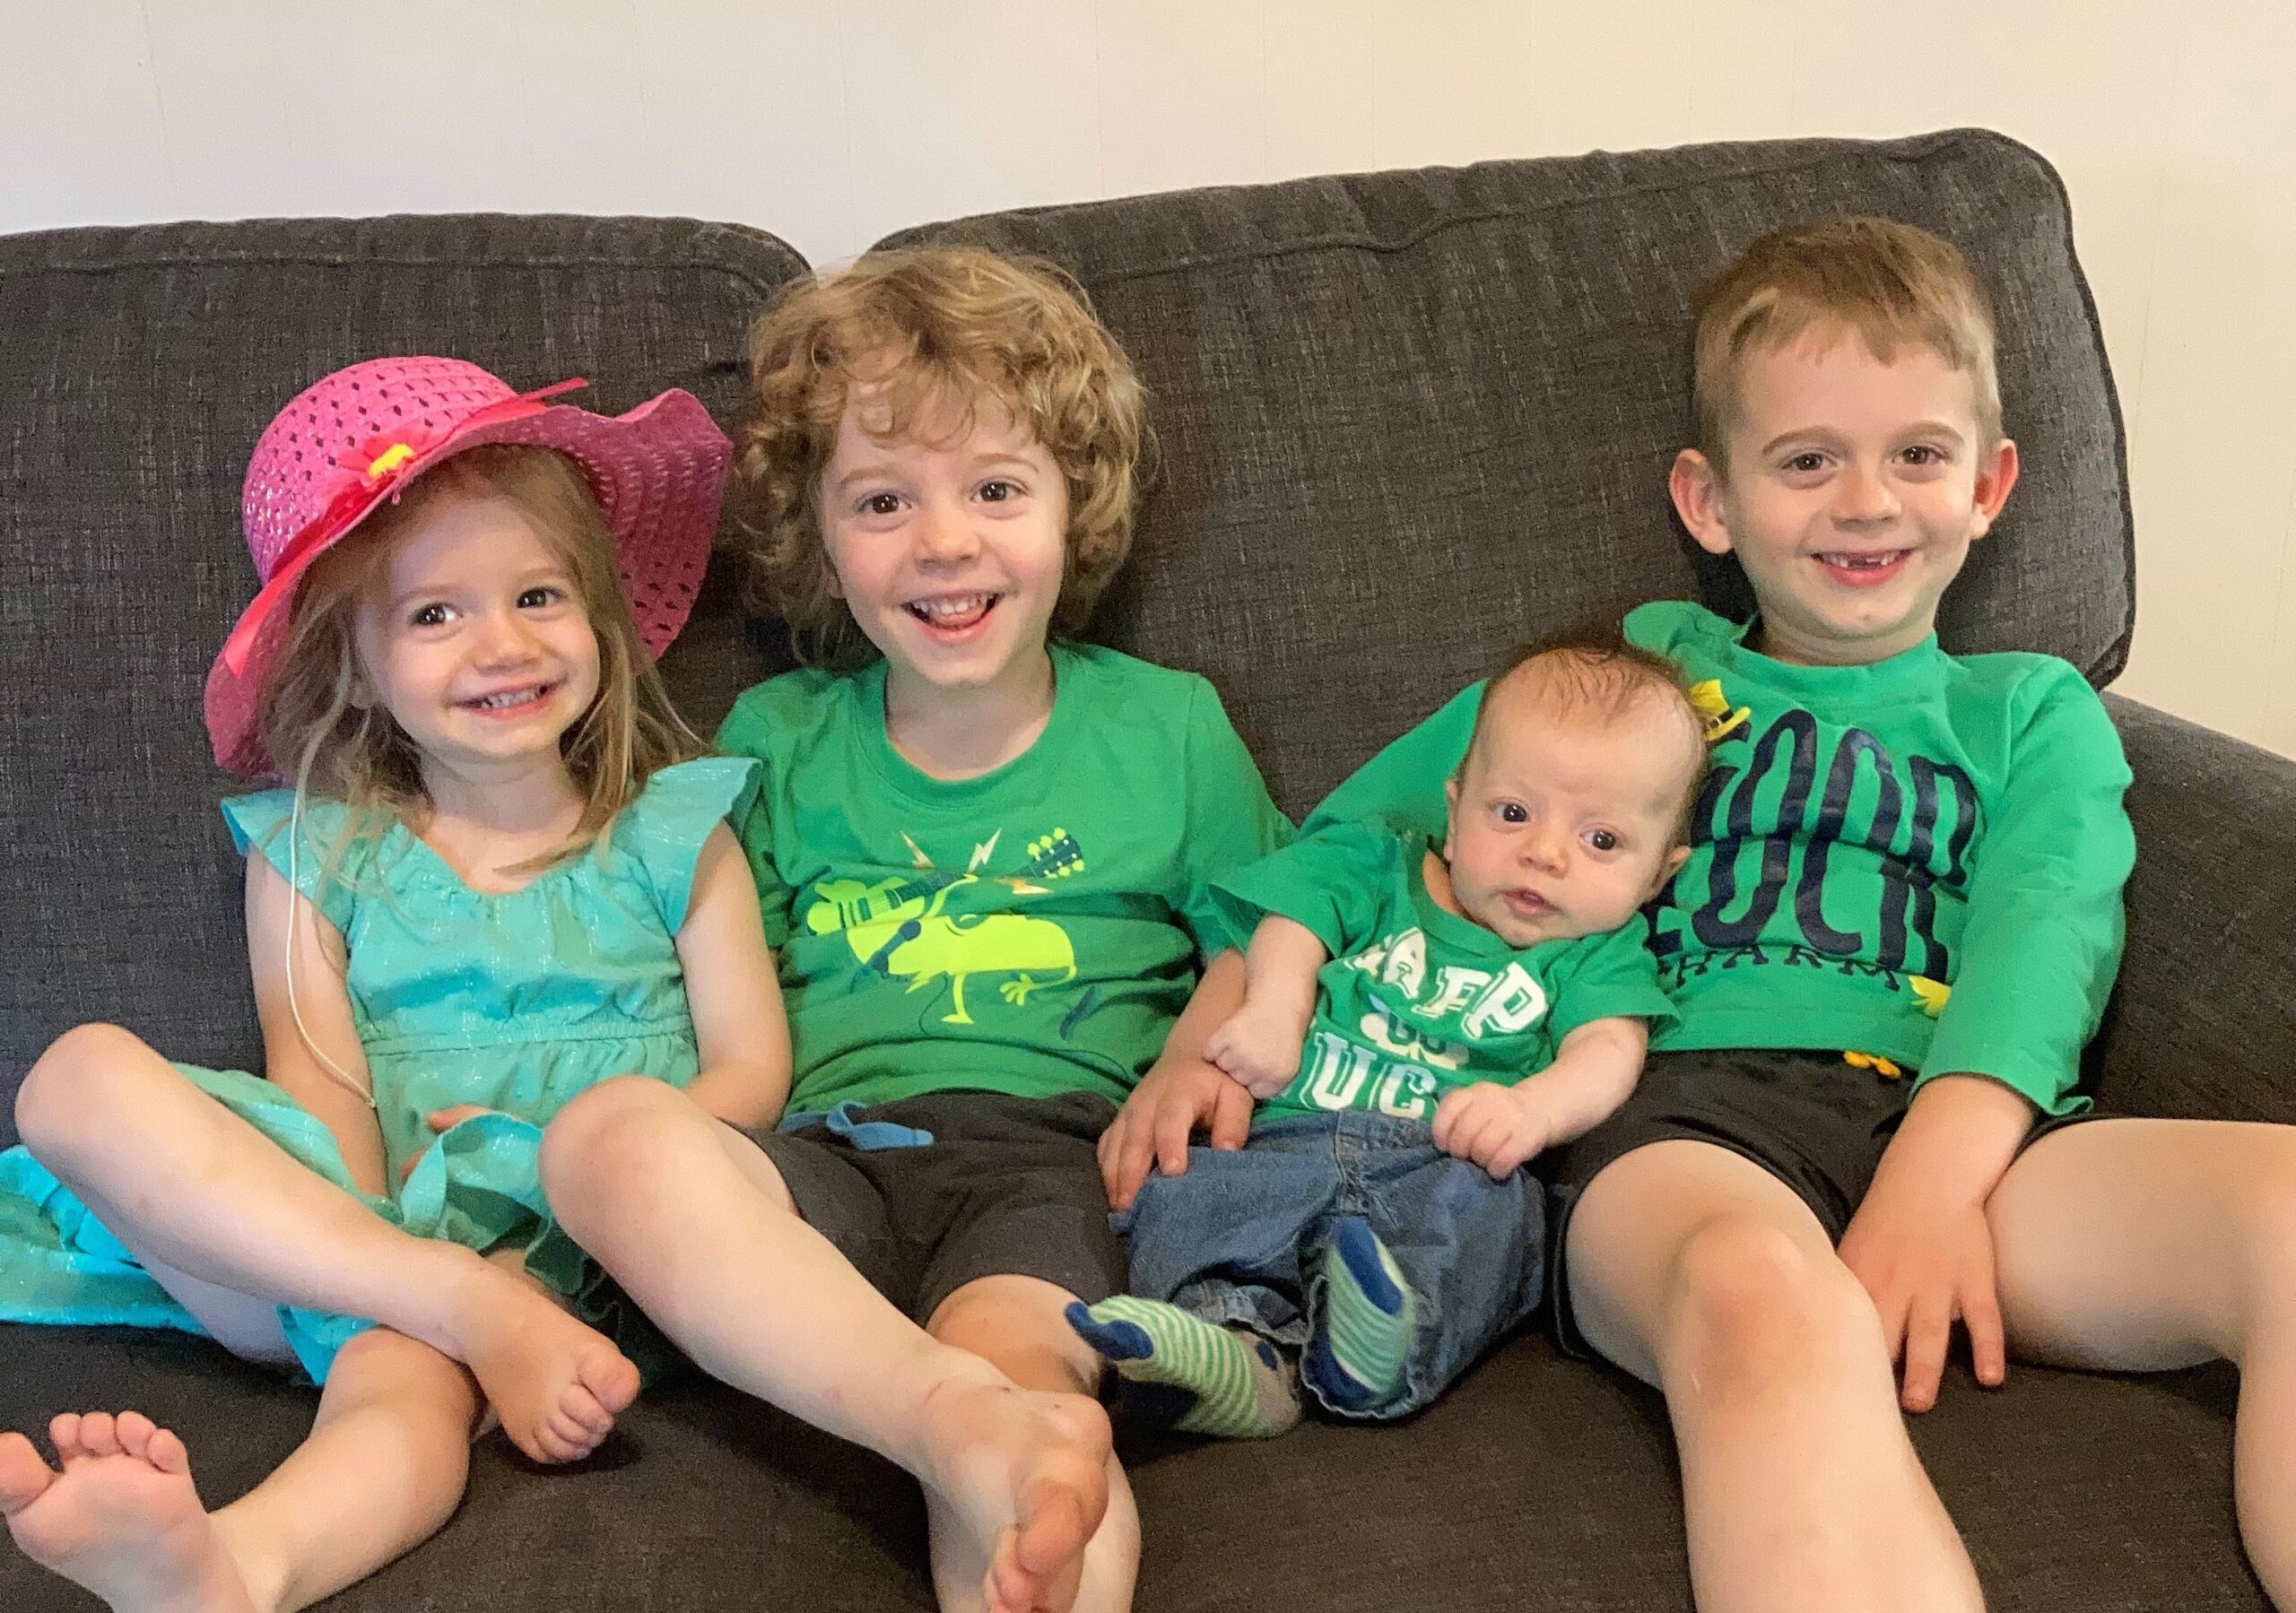 Four children dressed in various shades of green for St. Patrick's Day